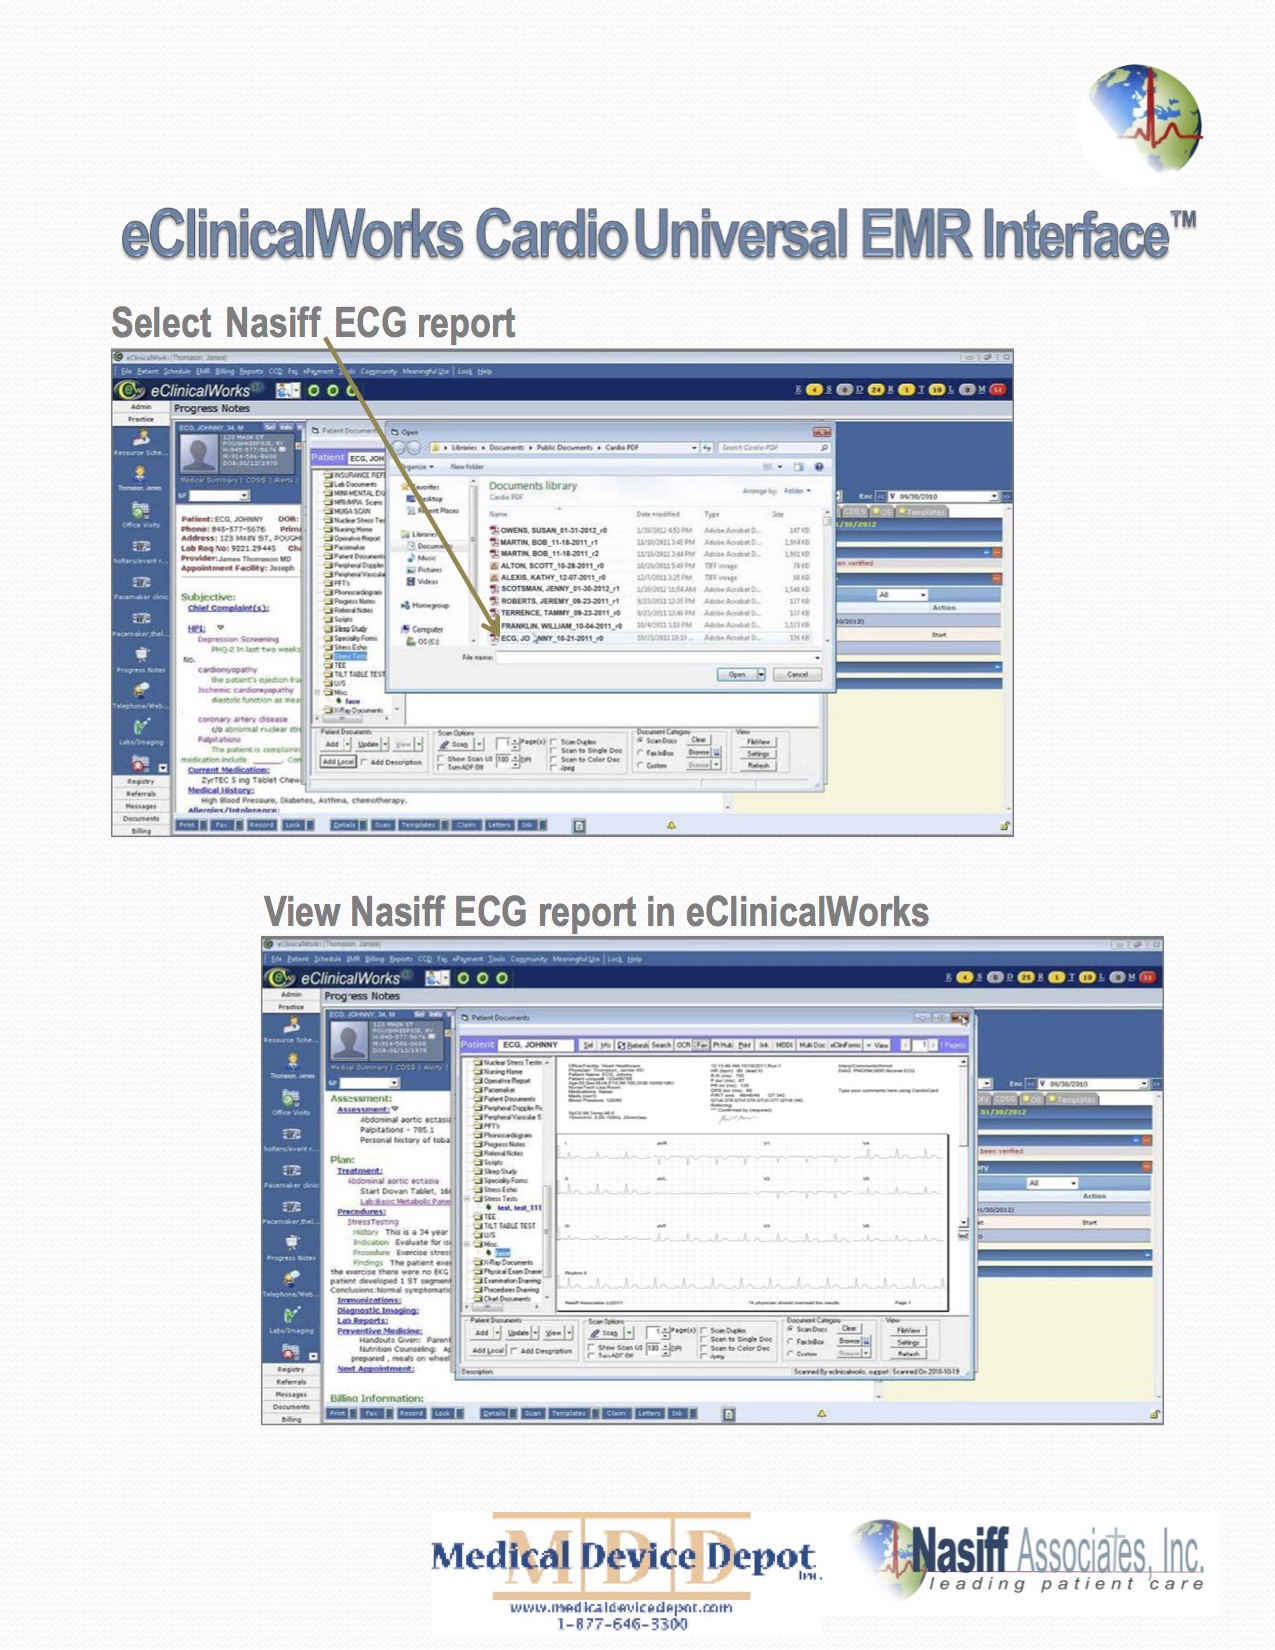 CardioCard Holter and ECG that are EMR Compatible